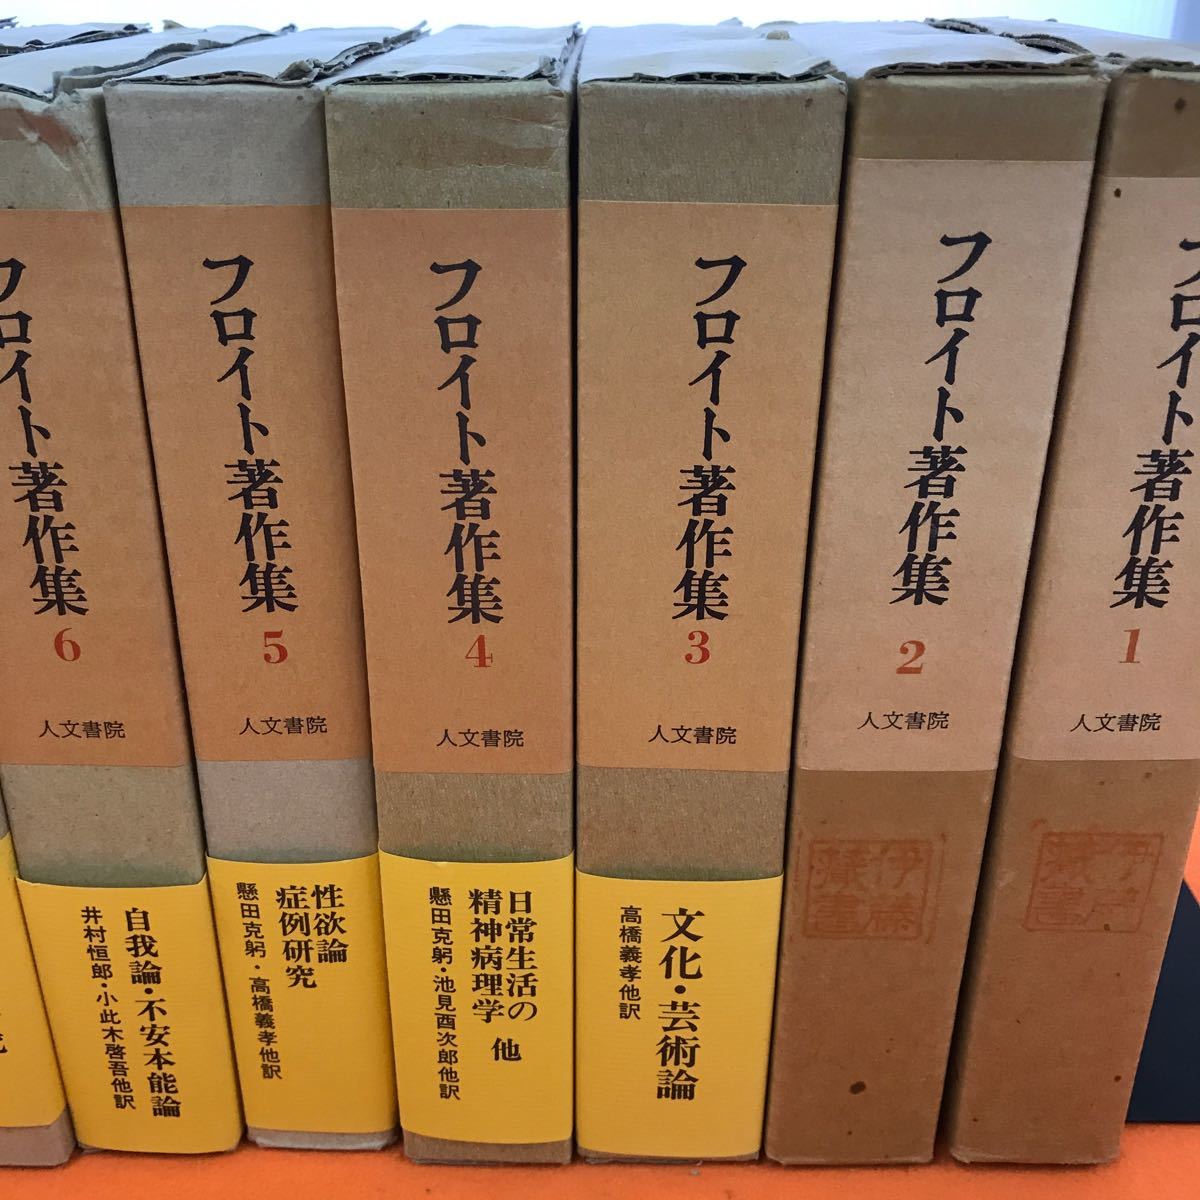 a22-015froito work work compilation all 11 volume summarize ( writing, bookplate, chronicle name coating ... equipped month . lack of. volume equipped )